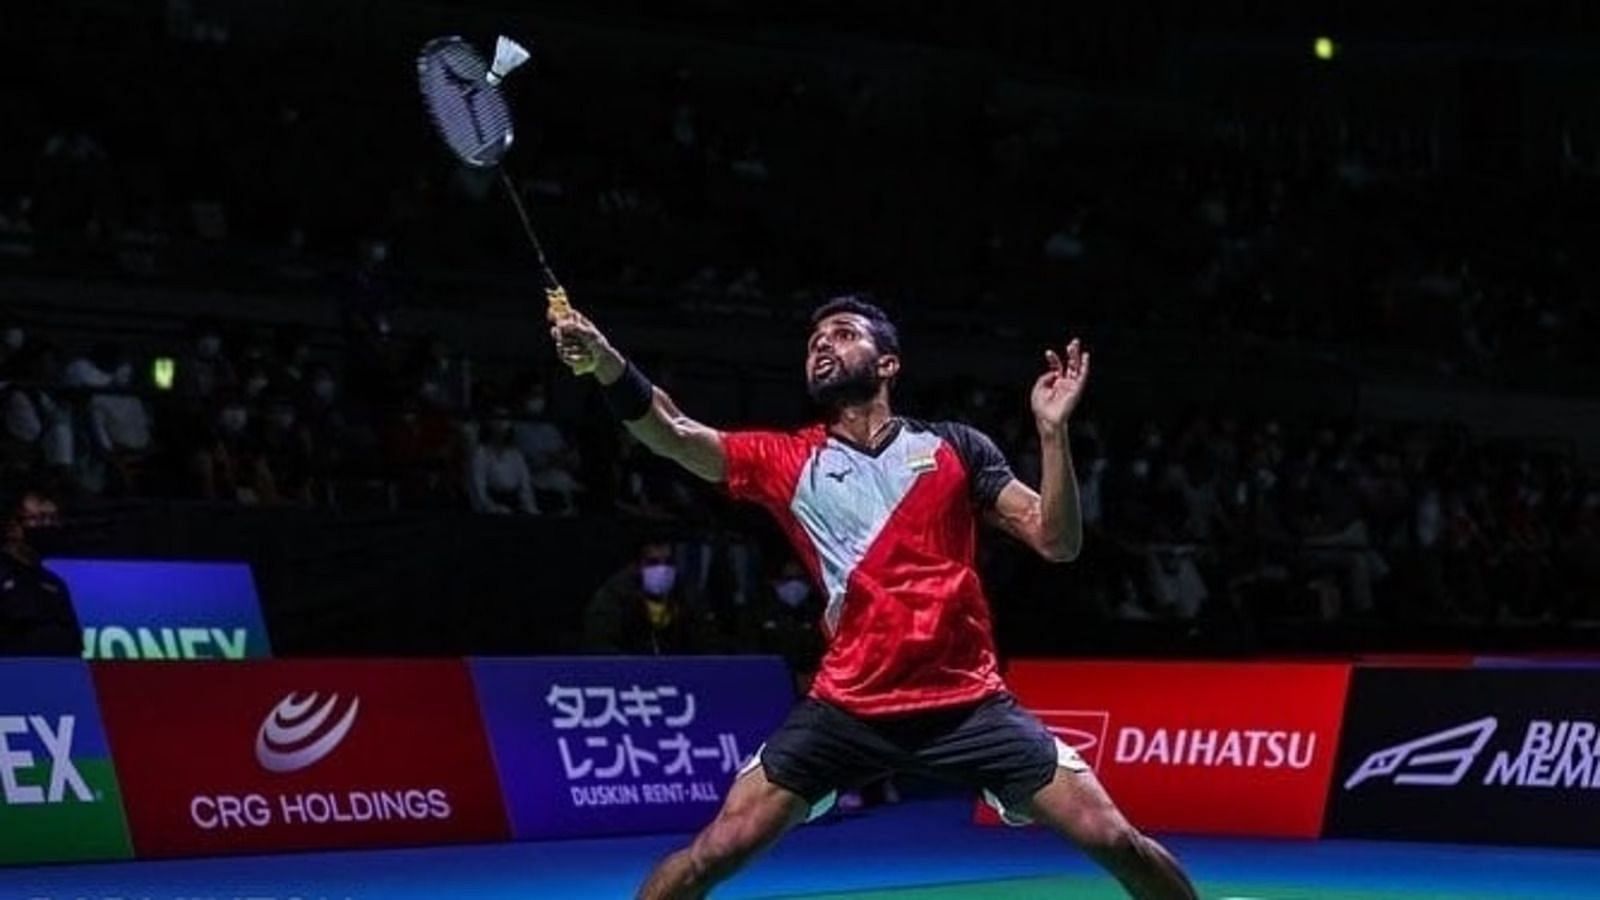 HS Prannoy will lead the charge for the men